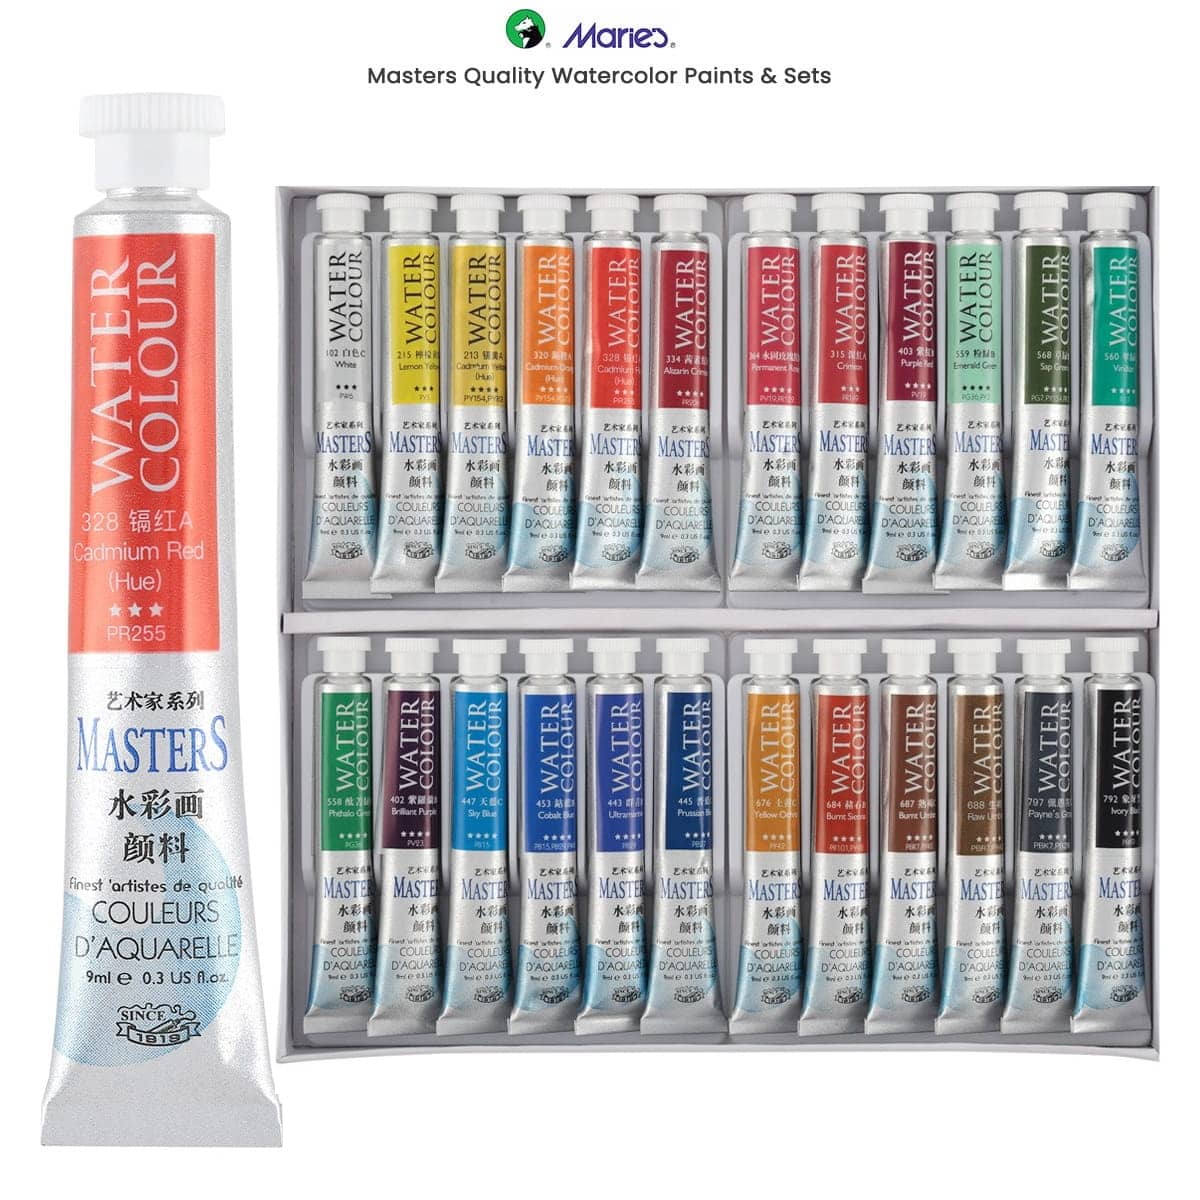 Best Pan Watercolors For Kids Art Projects –, 42% OFF